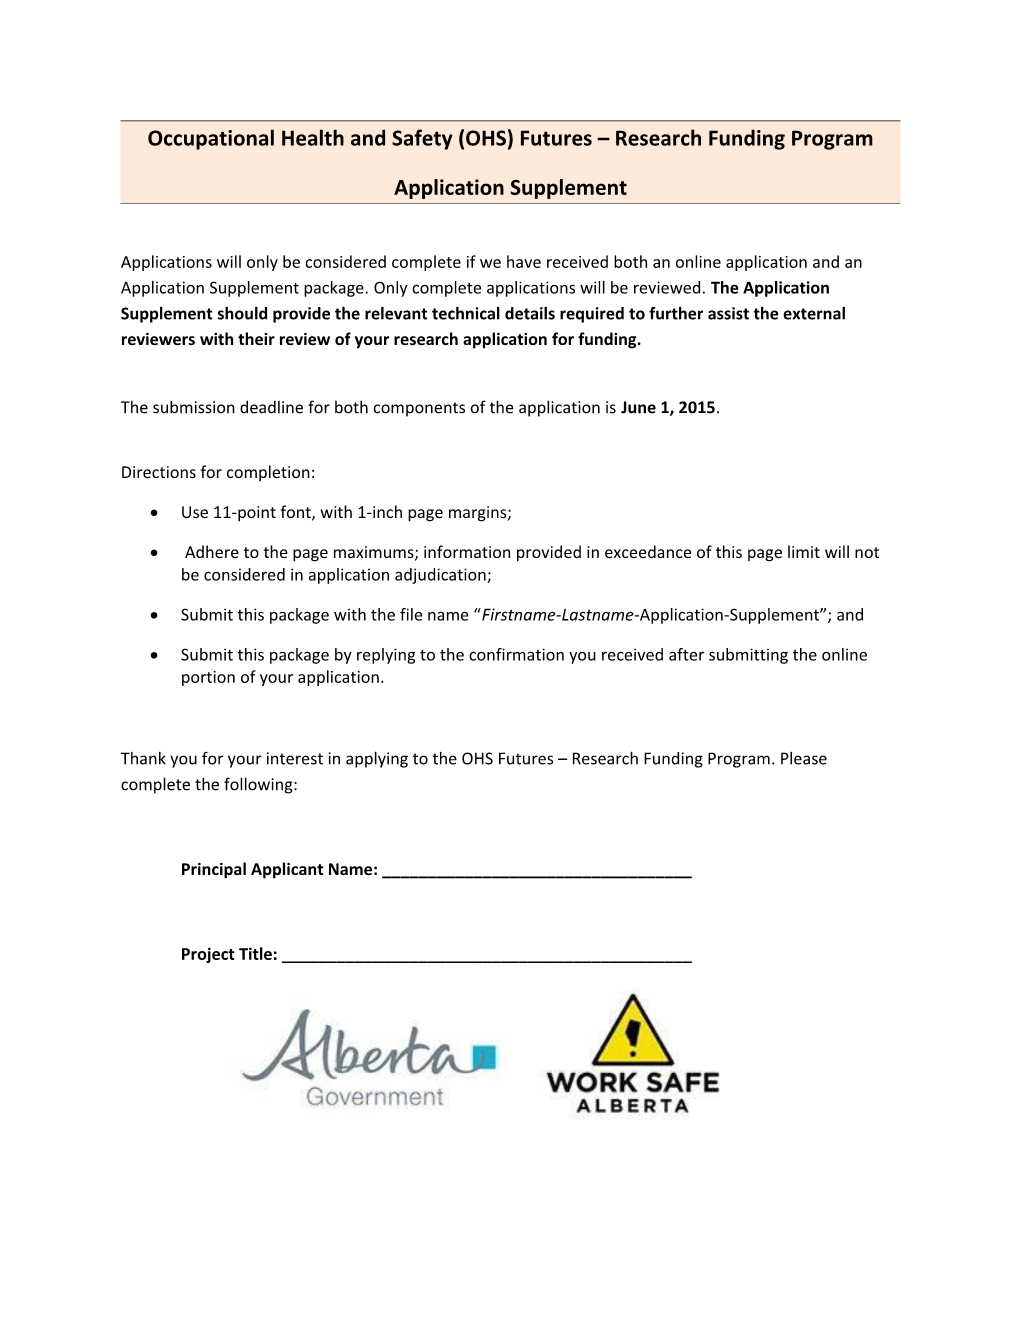 Occupational Health and Safety (OHS) Futures Research Funding Program - Application Supplement